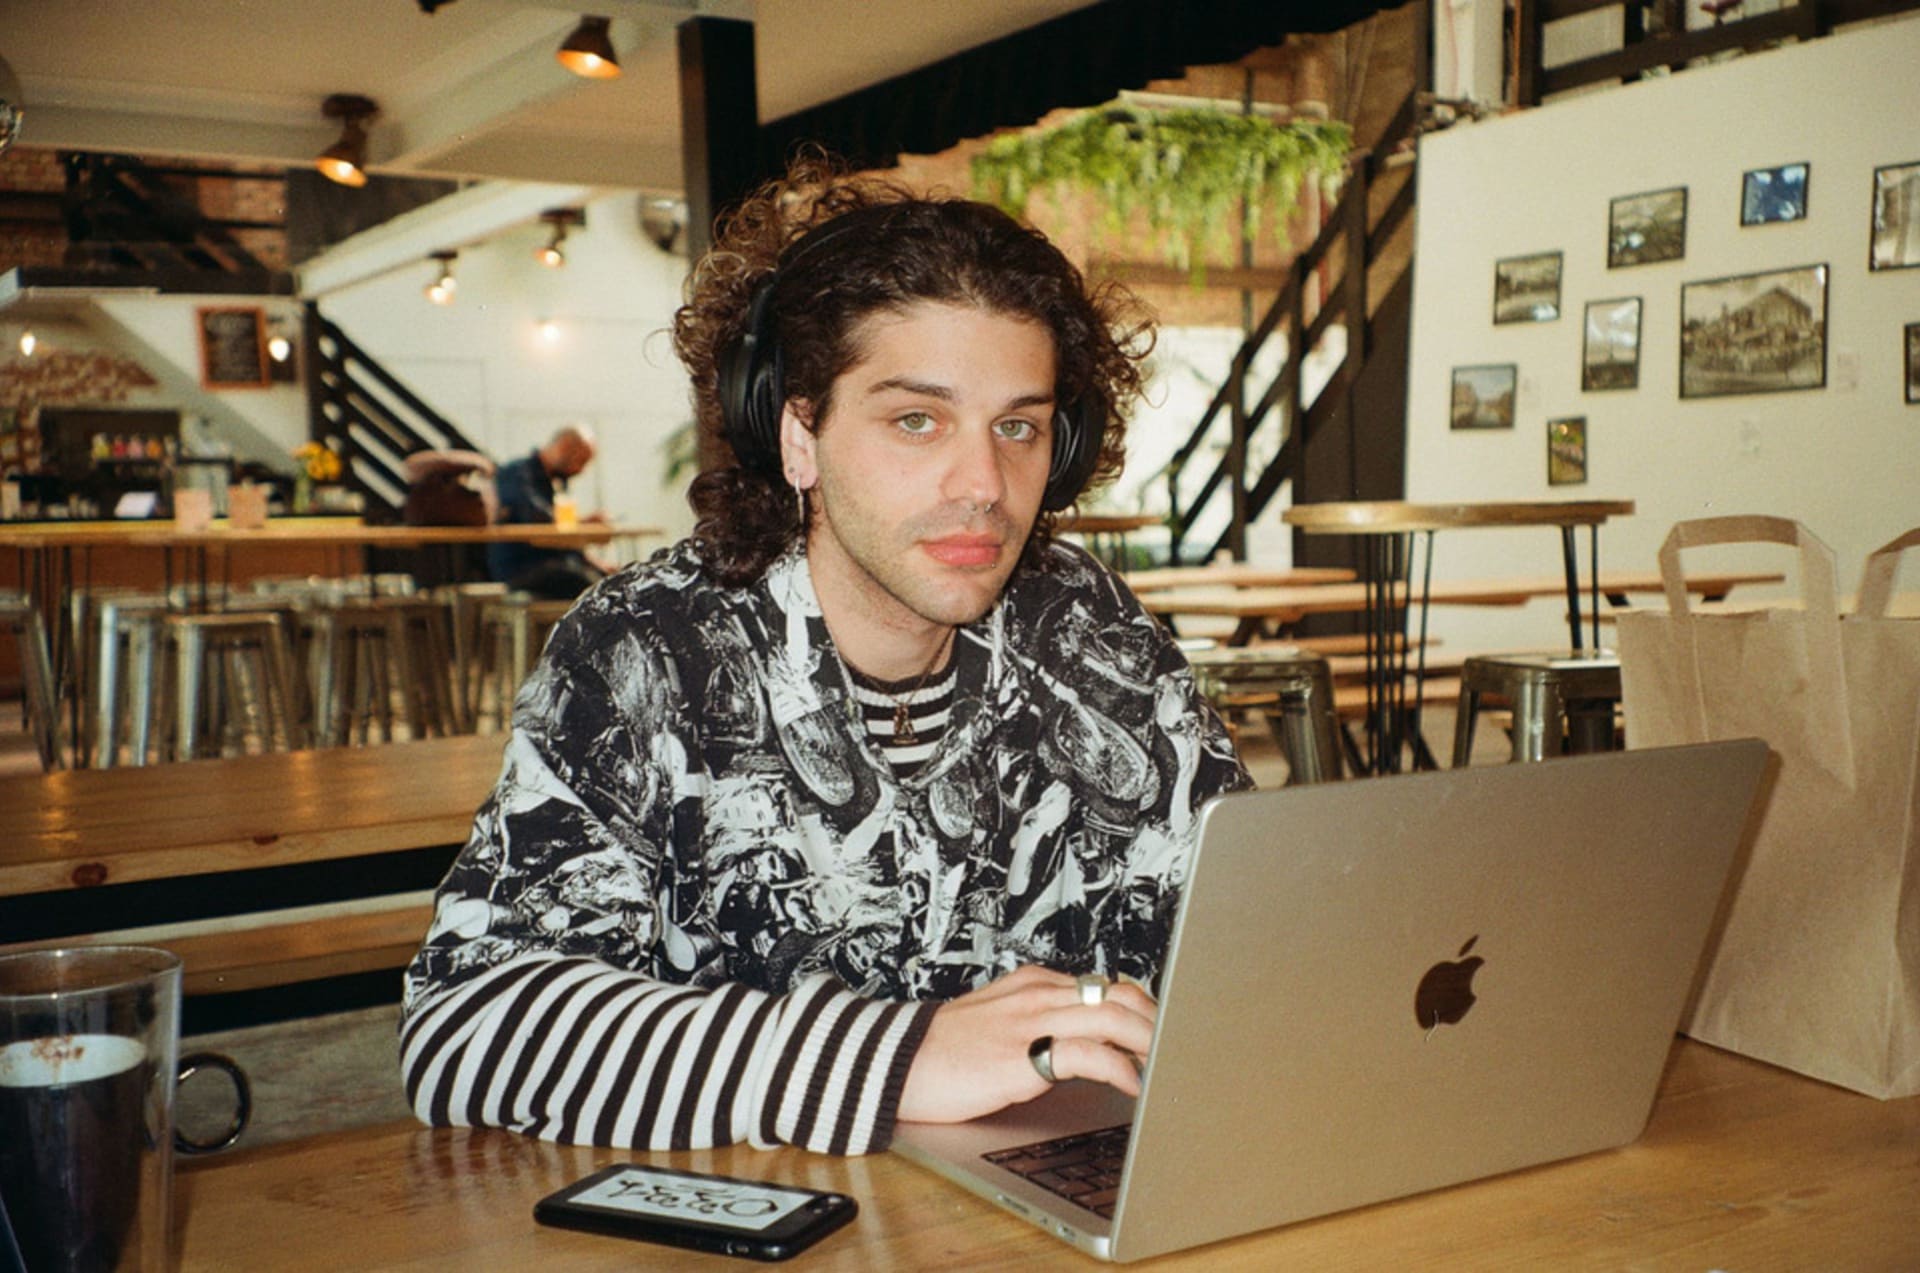 Photo of the artist working on a MacBook at a cafe.